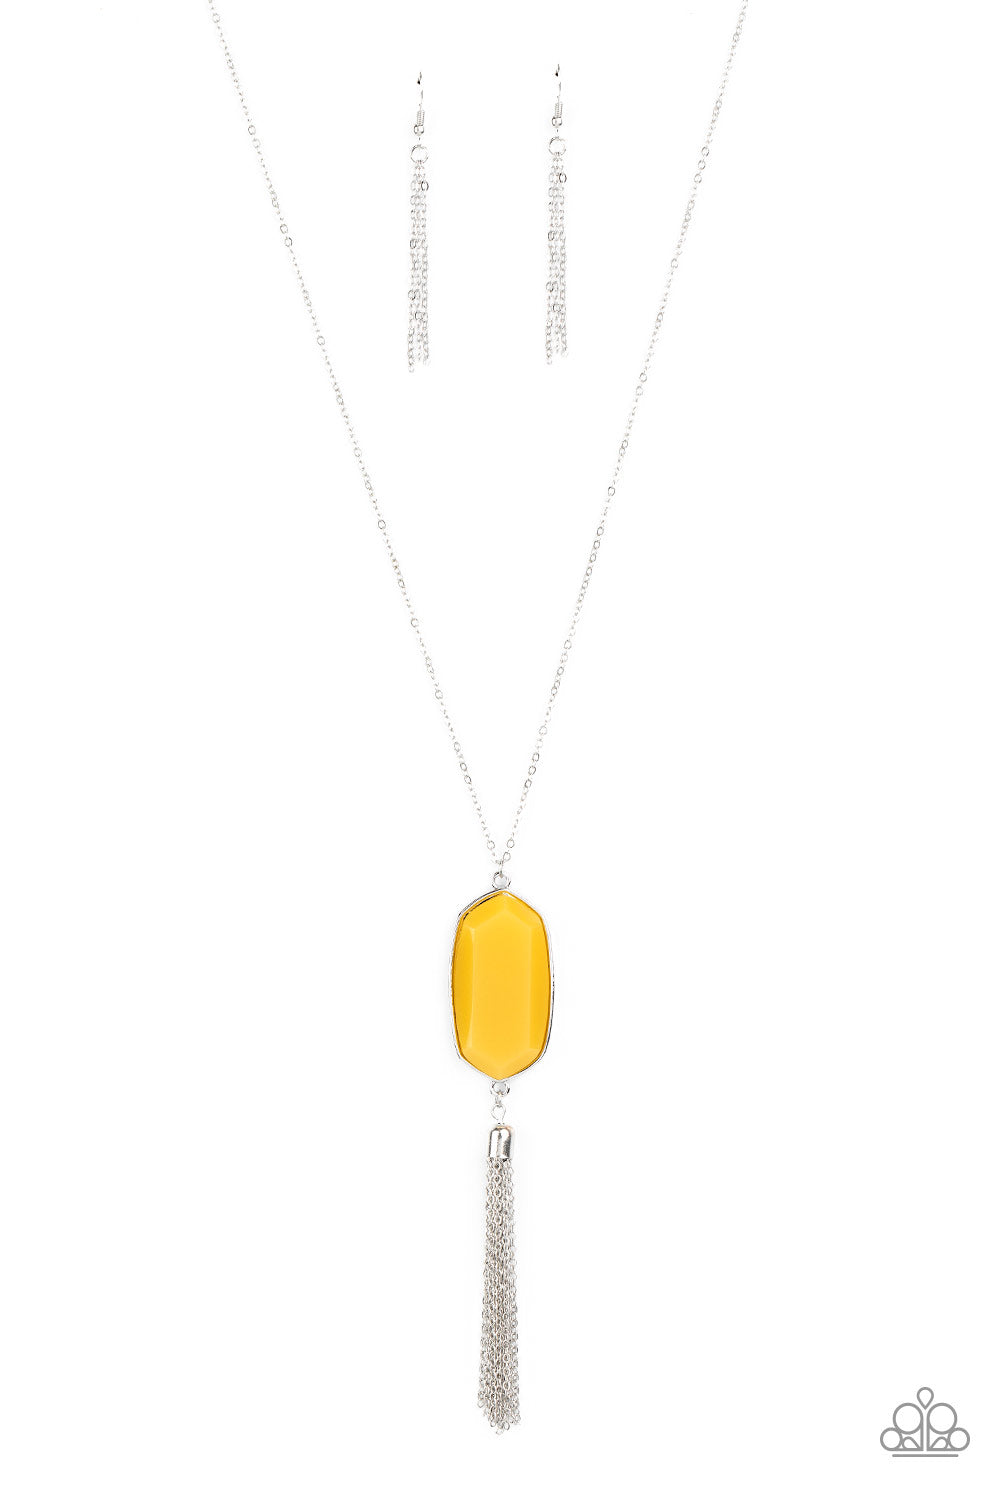 Featuring a faceted surface, a dewy yellow acrylic gem swings from the bottom of a lengthened silver chain. A shimmery silver chain tassel attaches to the bottom of the colorful pendant, adding flirtatious movement. Features an adjustable clasp closure.